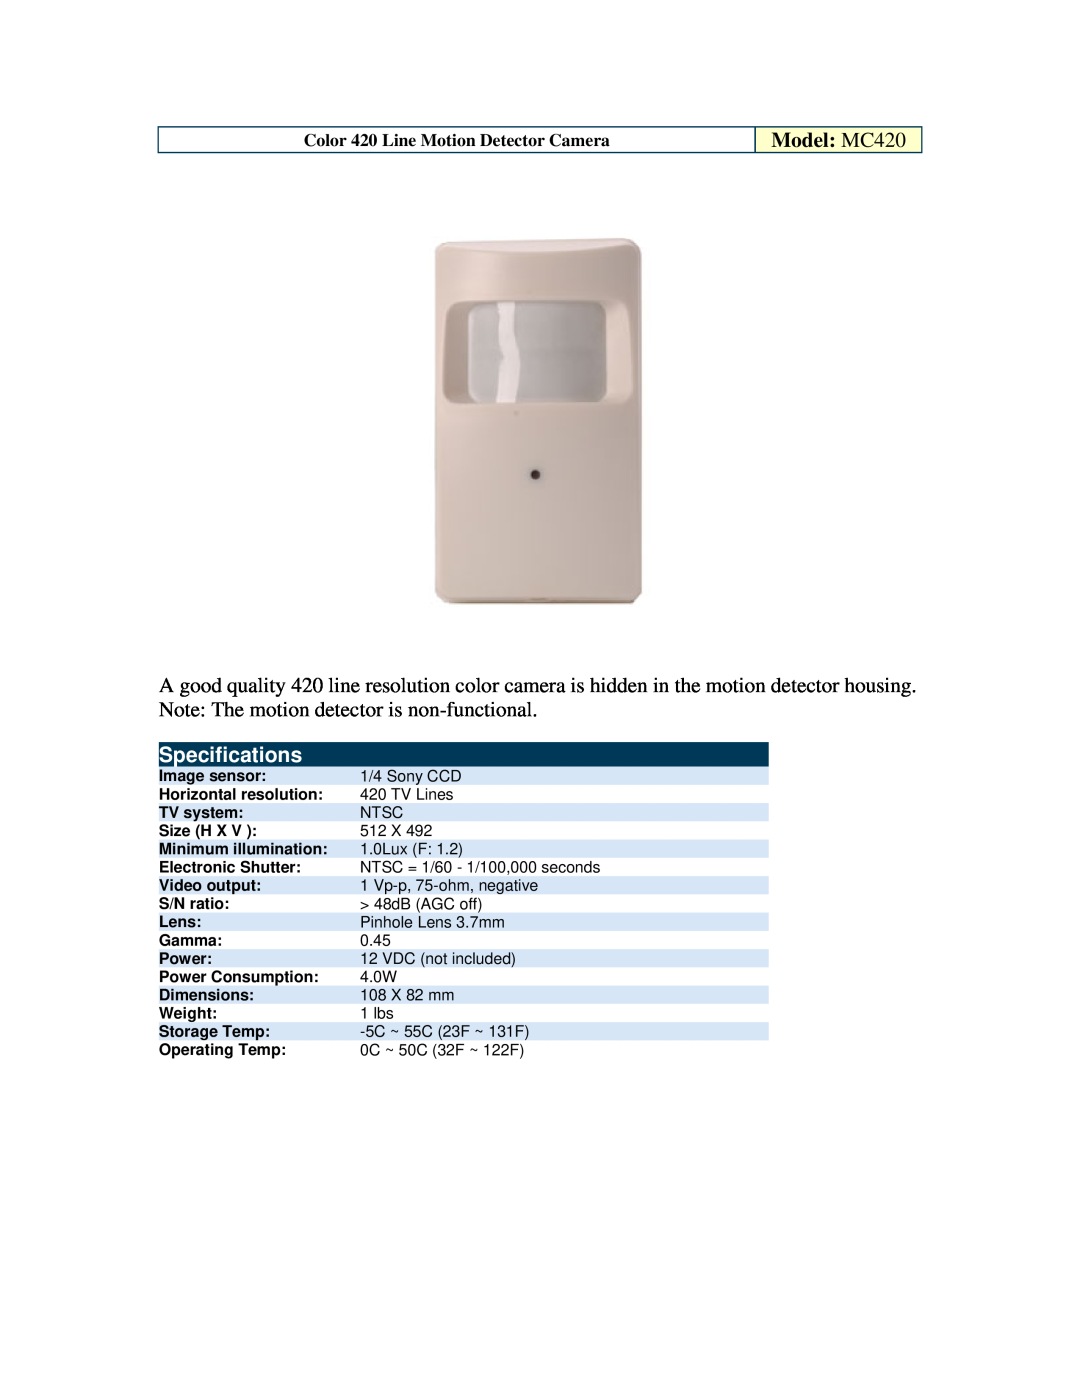 Optiview specifications Model MC420, Specifications, Color 420 Line Motion Detector Camera 